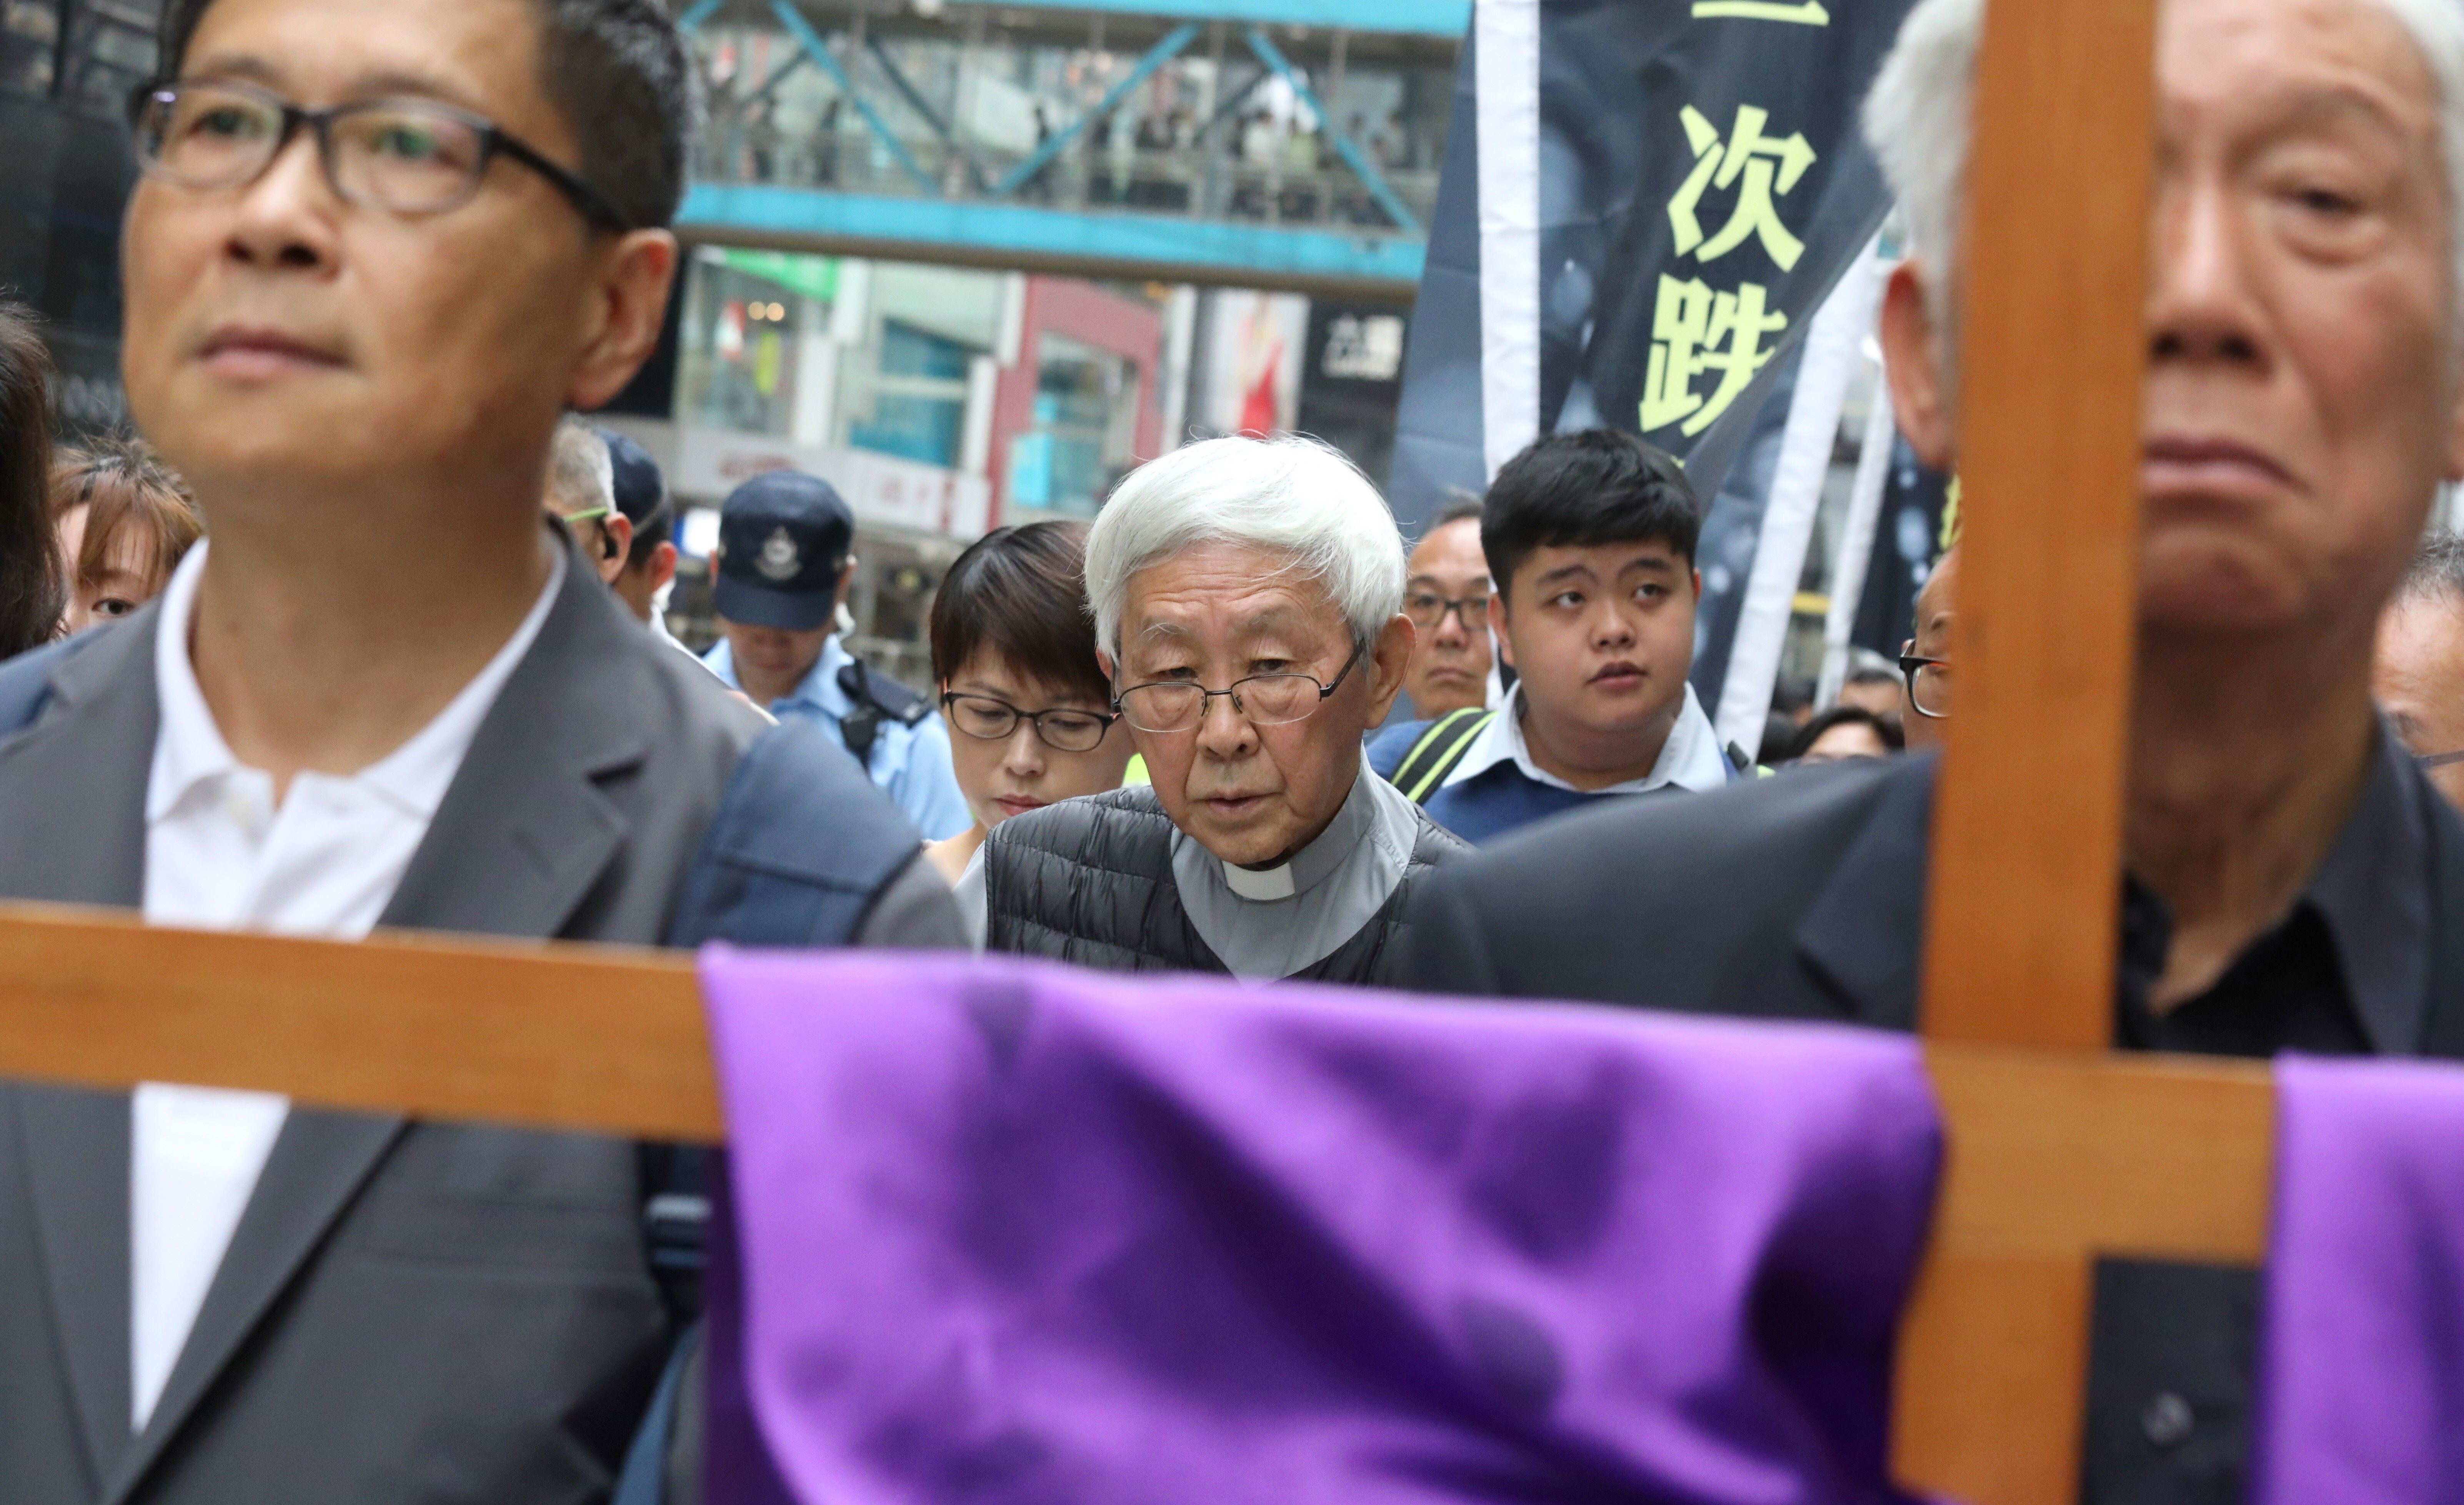 Cardinal Joseph Zen (centre) joins Christians (both Catholics and Protestants) in a protest rally from Causeway Bay to the central government headquarters in Admiralty, to mark the death of democracy in Hong Kong on March 30, 2019. Photo: Dickson Lee